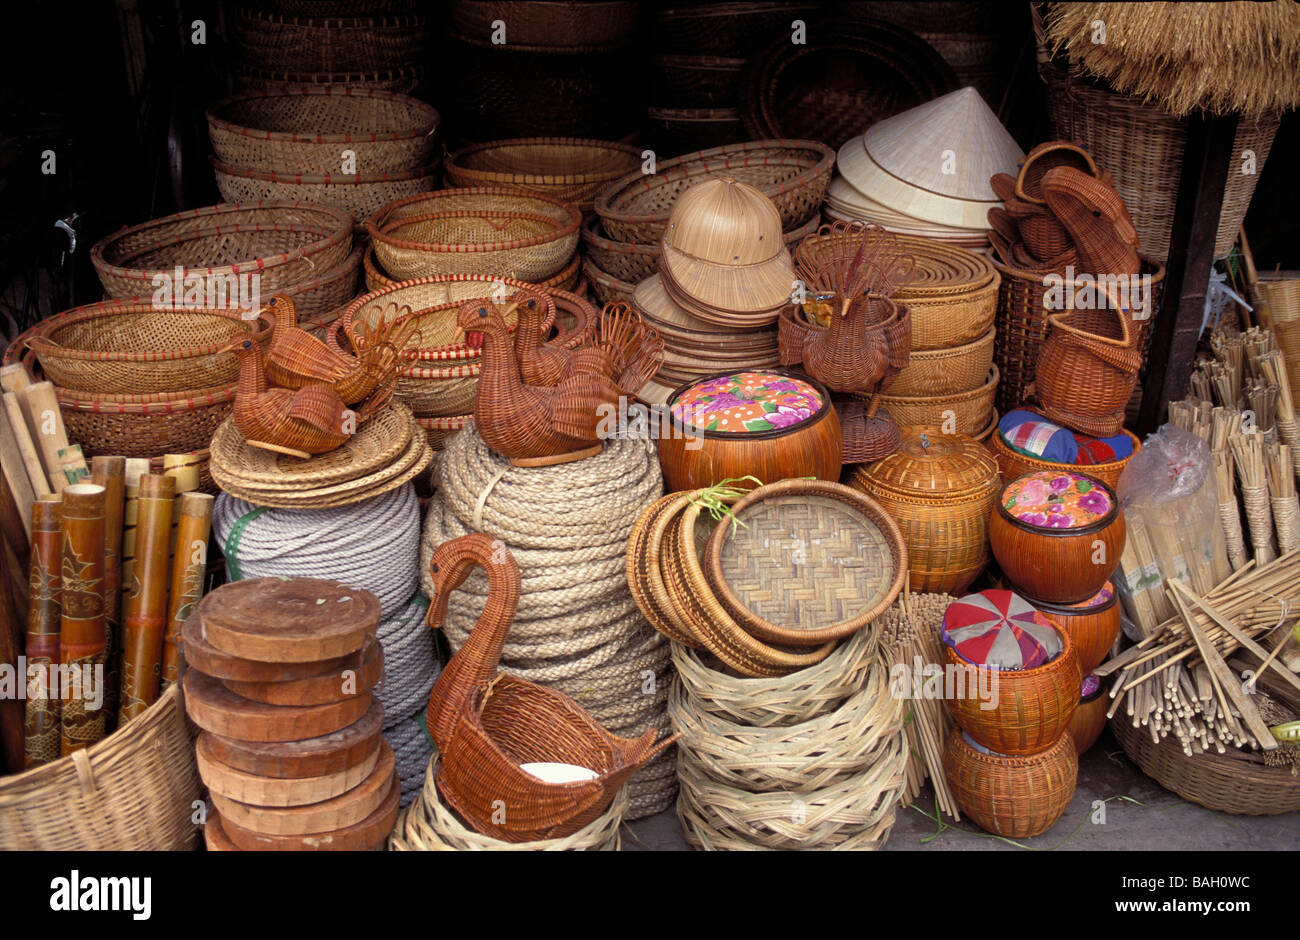 Vietnam, Hanoi, market, baskets and various objects made with bamboo and rattan Stock Photo